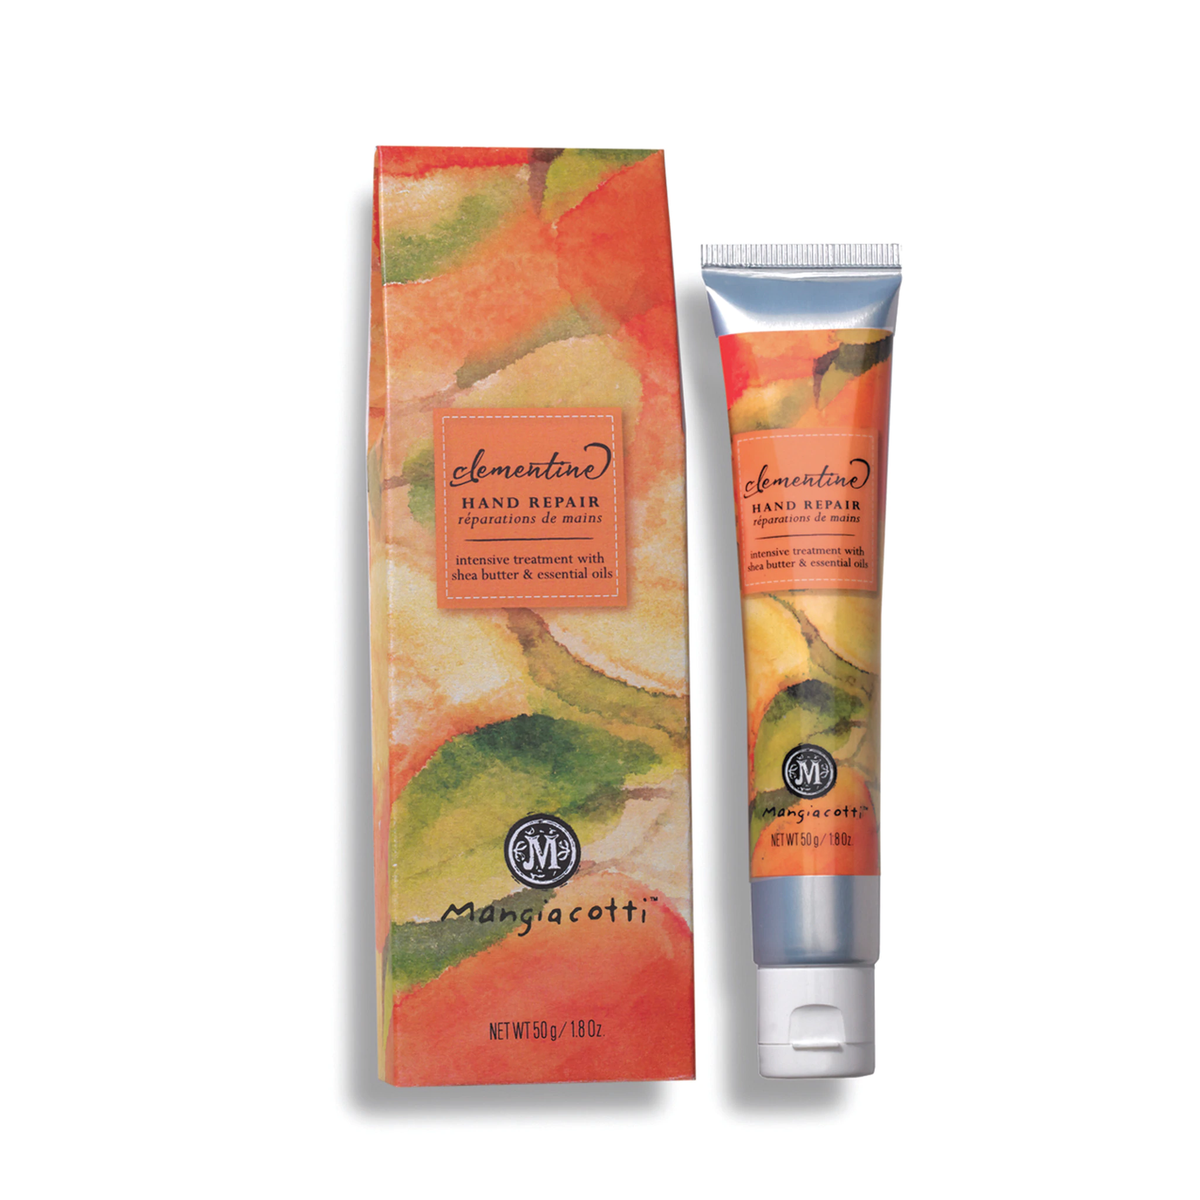 A tube and box of Mangiacotti Clementine Hand Repair displayed against a white background. The packaging, infused with shea butter, features a colorful, abstract watercolor design in shades of red, yellow.